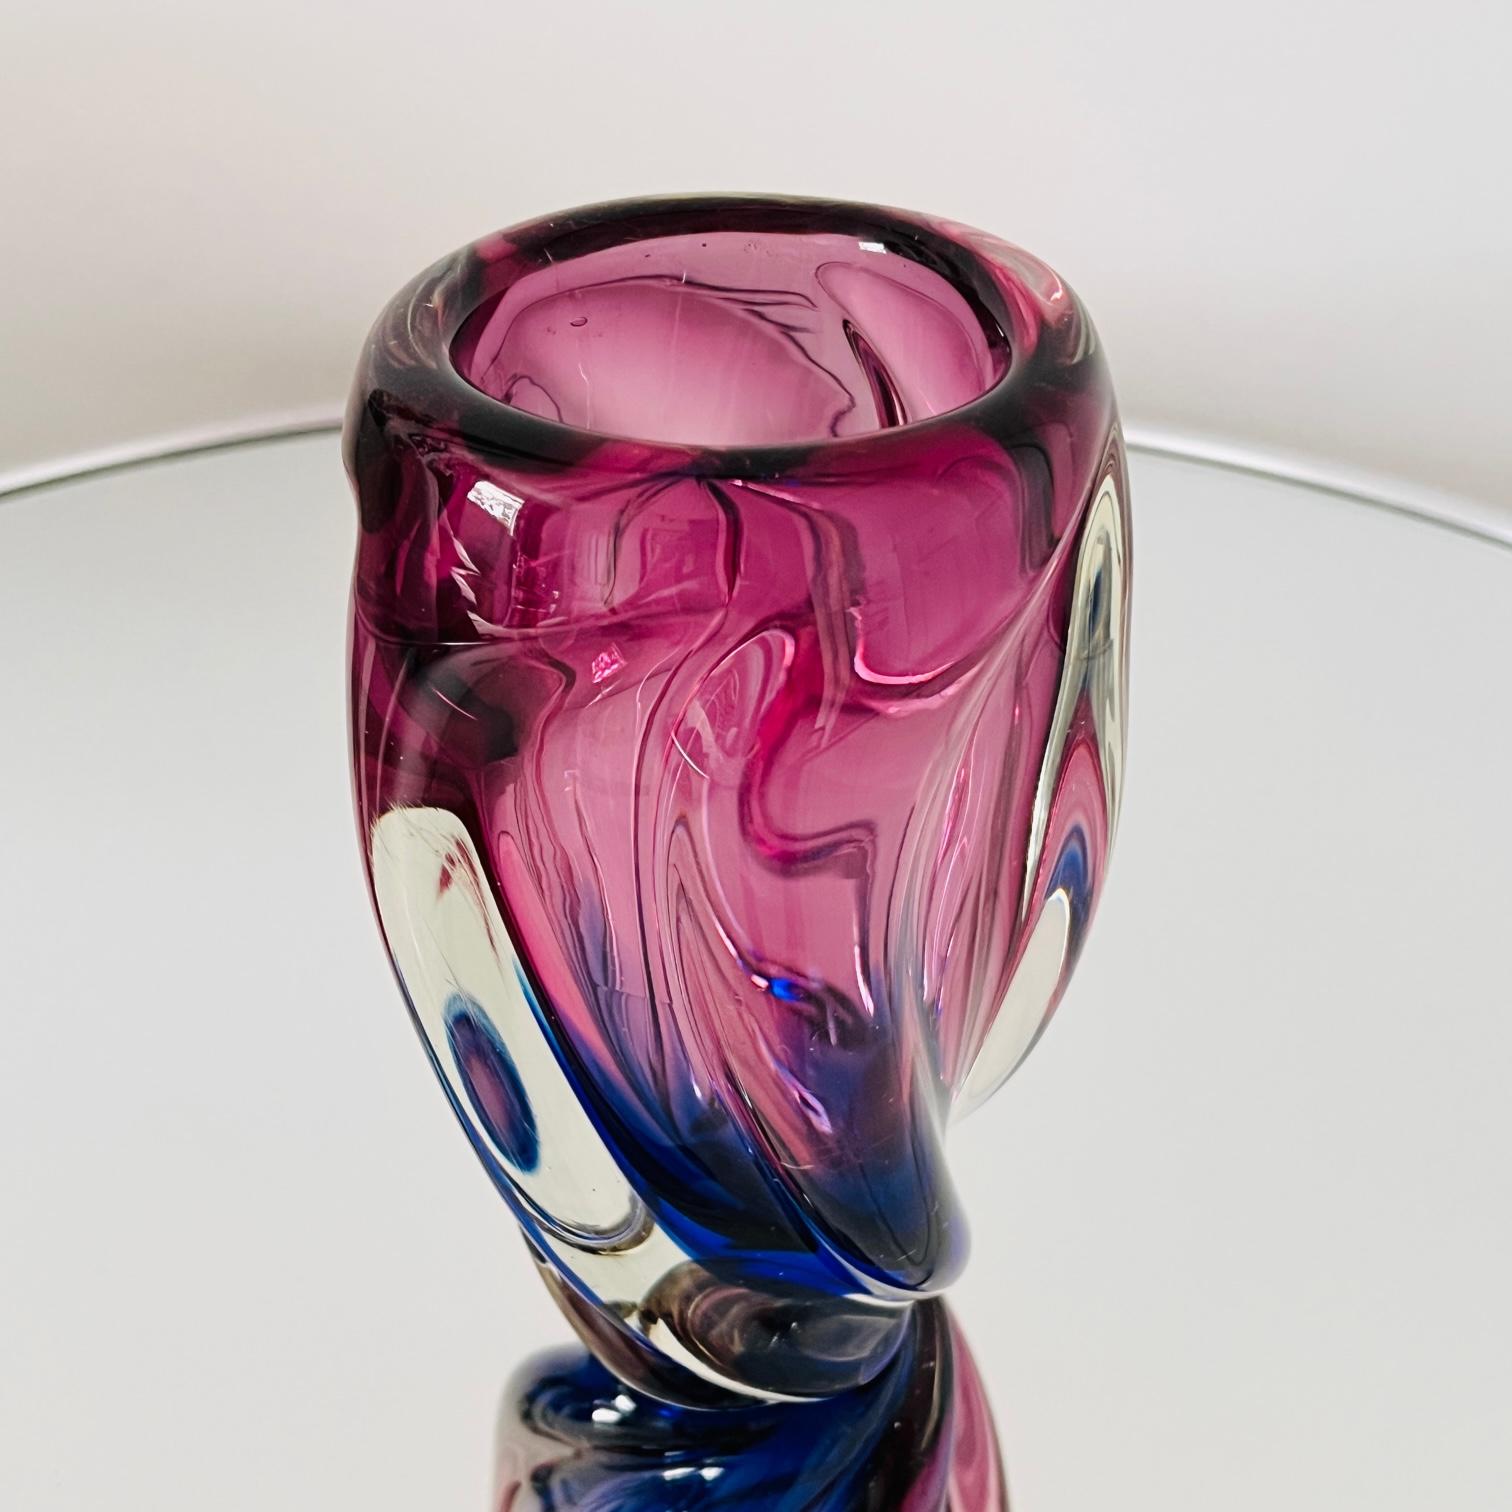 Hand-Crafted Murano Swirl Vase in Violet, Purple, & Blue by Flavio Poli for Seguso, 1960's